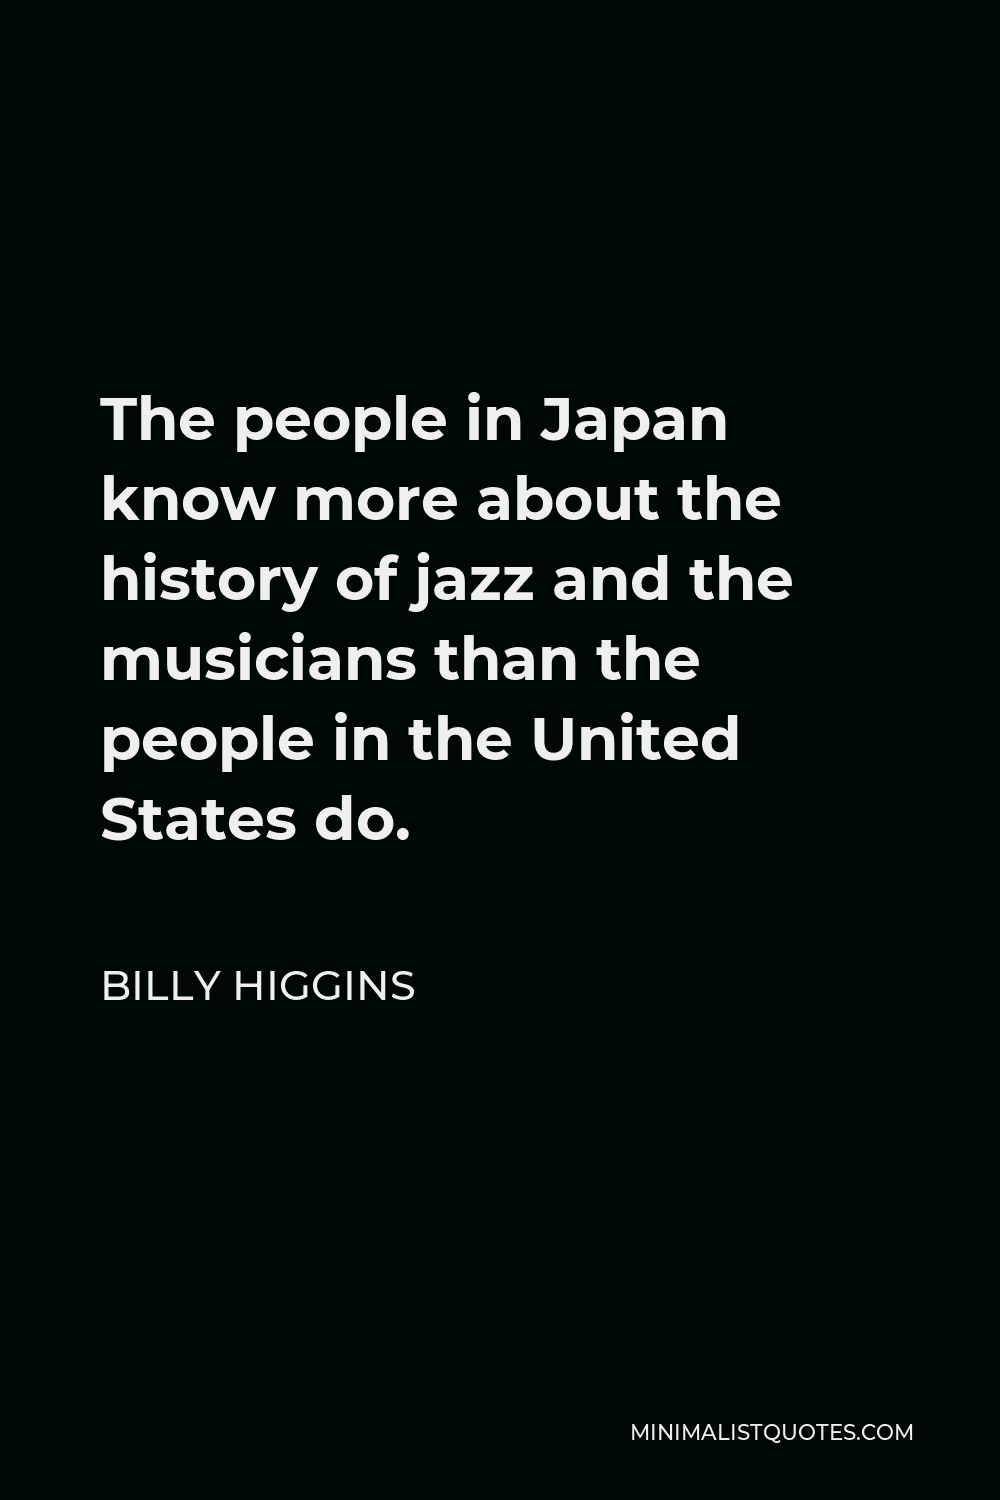 Billy Higgins Quote - The people in Japan know more about the history of jazz and the musicians than the people in the United States do.